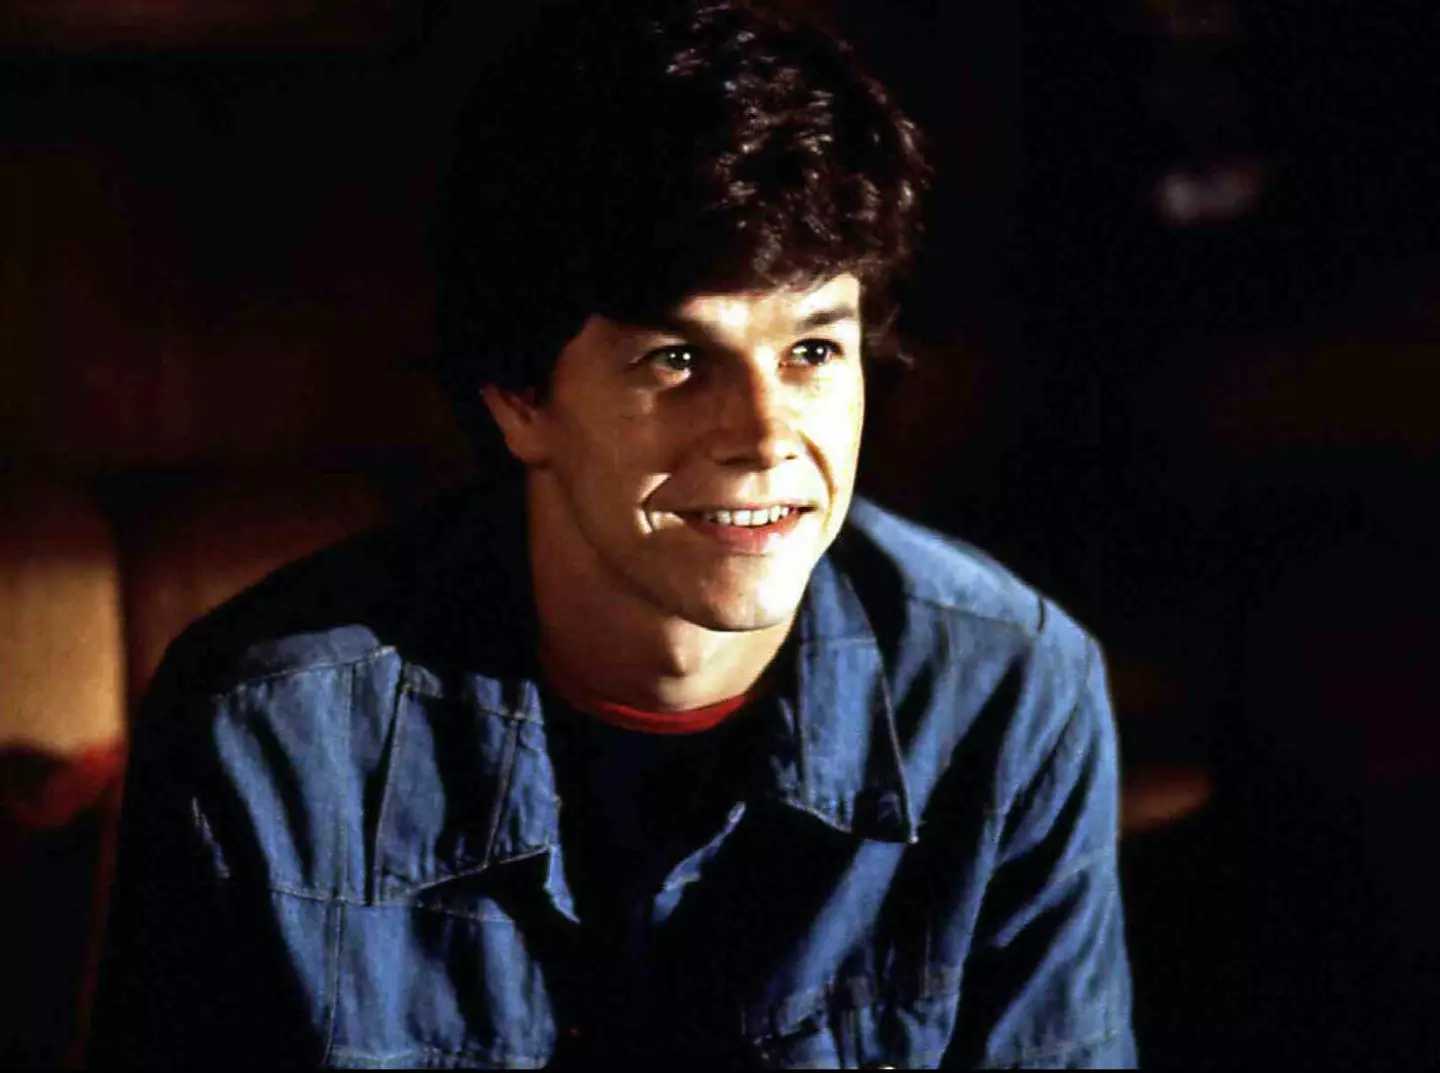 Mark Wahlberg in one of his break-out roles, Boogie Nights.